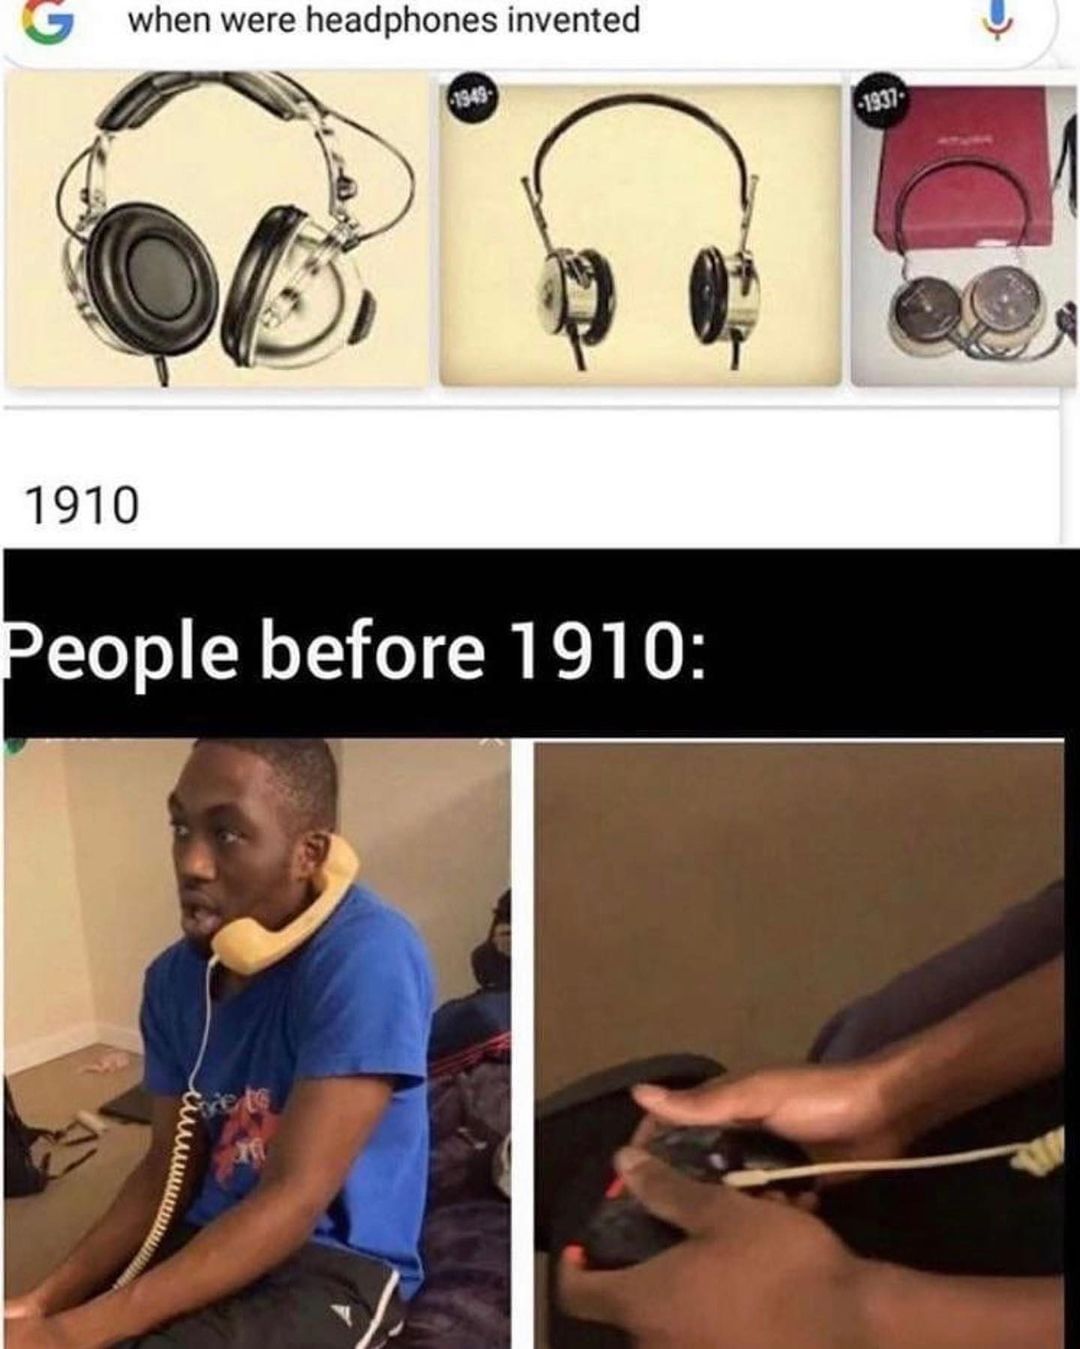 When were headphones invented 1910. People before 1910: